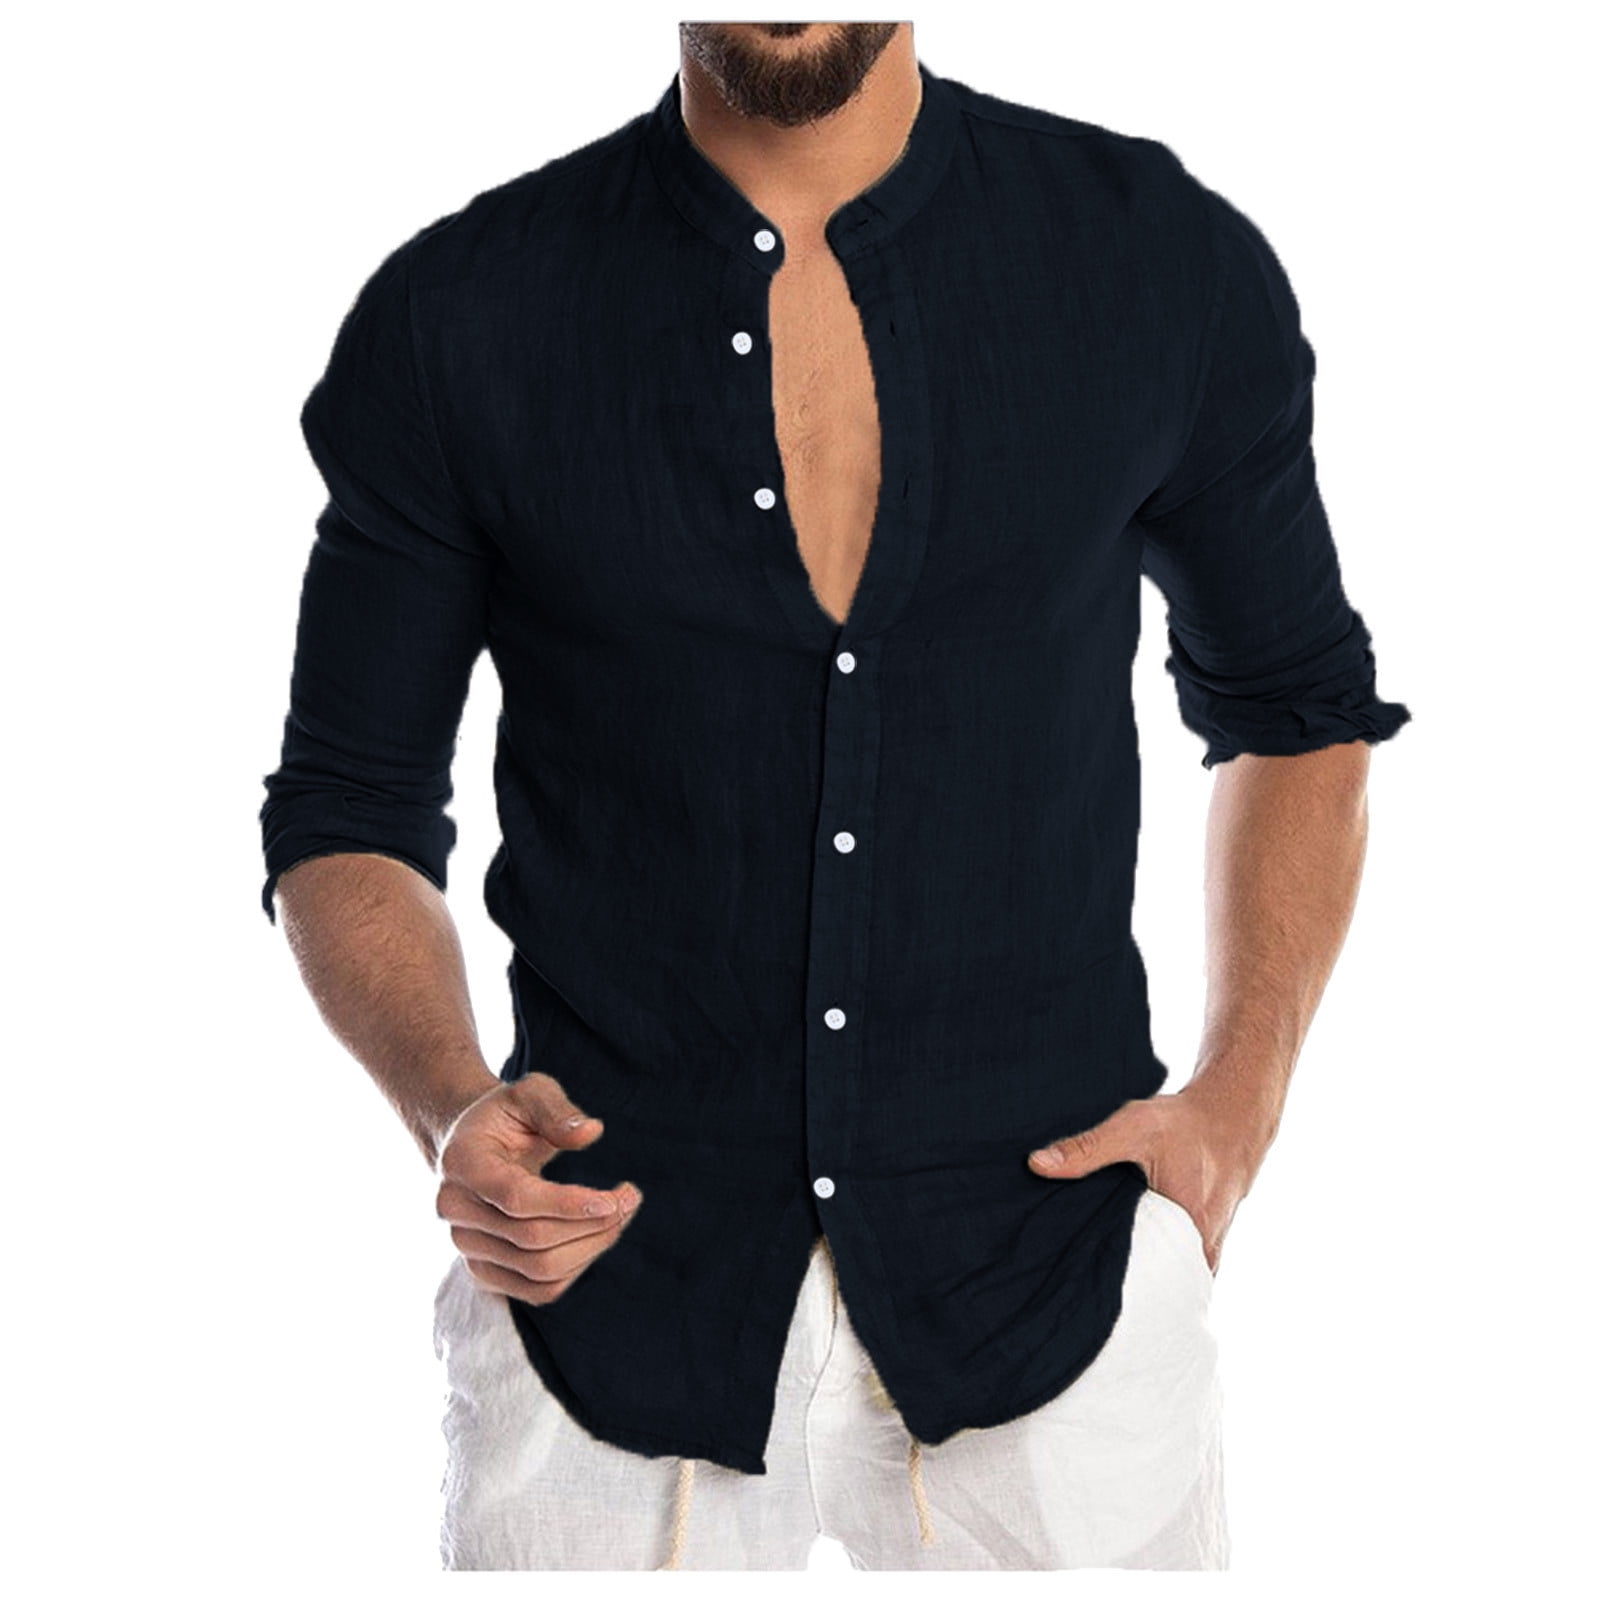 Men's Linen Style Solid Shirts Casual Long Sleeve Fit Formal Dress Top Tee Shirt